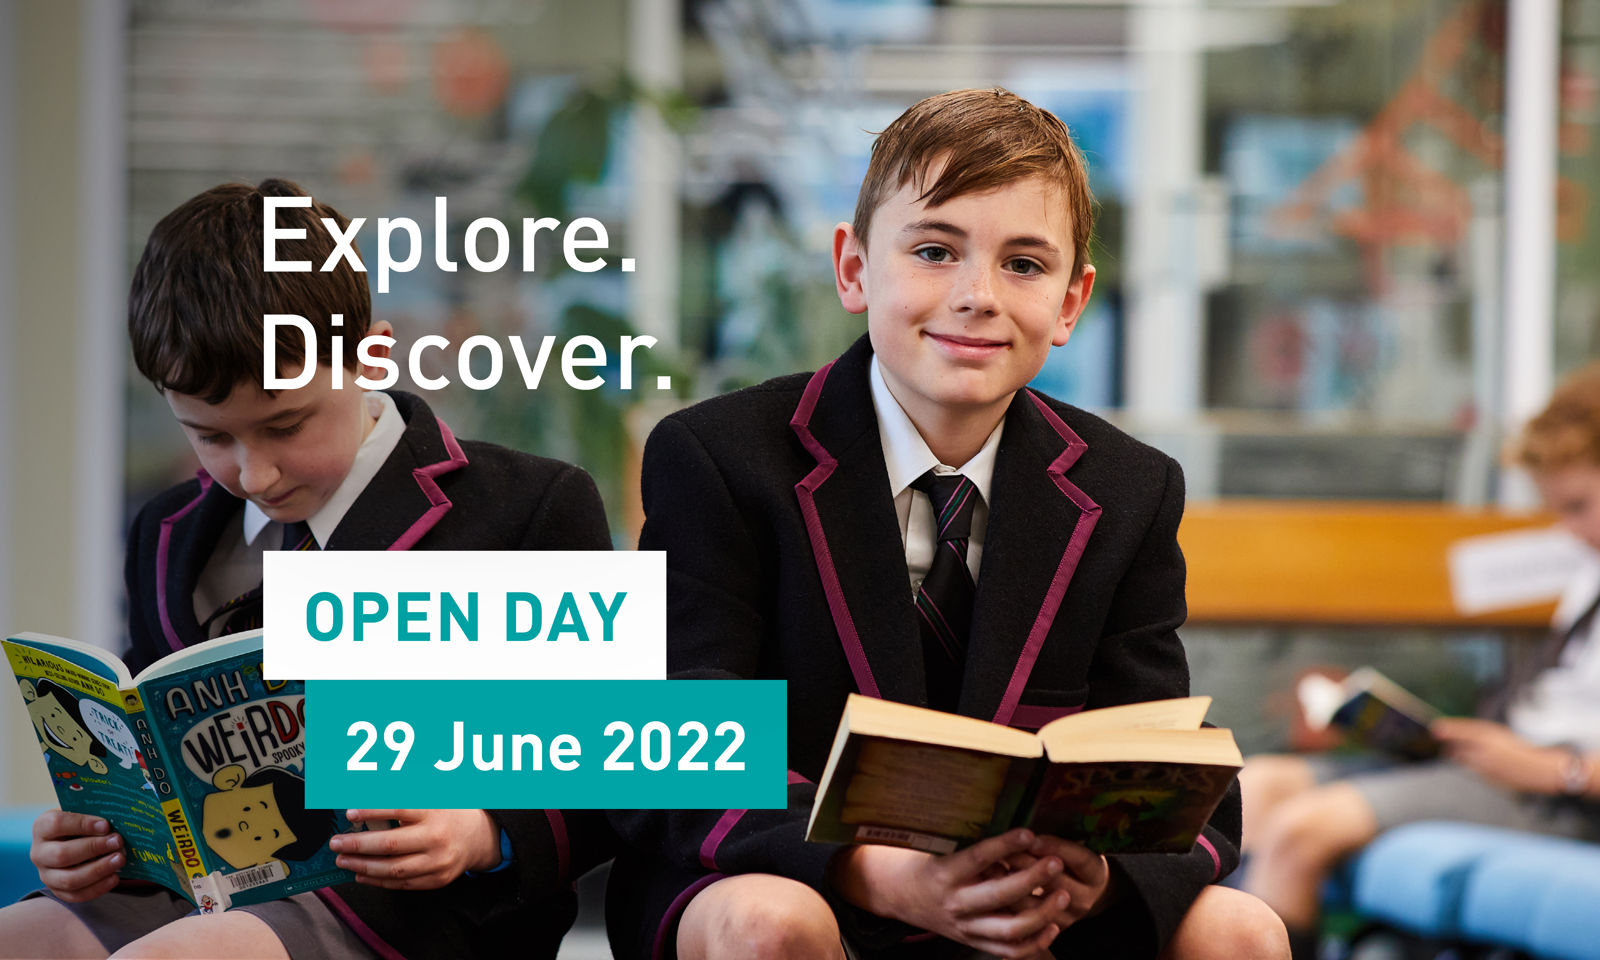 Explore the opportunities at our Open Day on 29 June 2022.